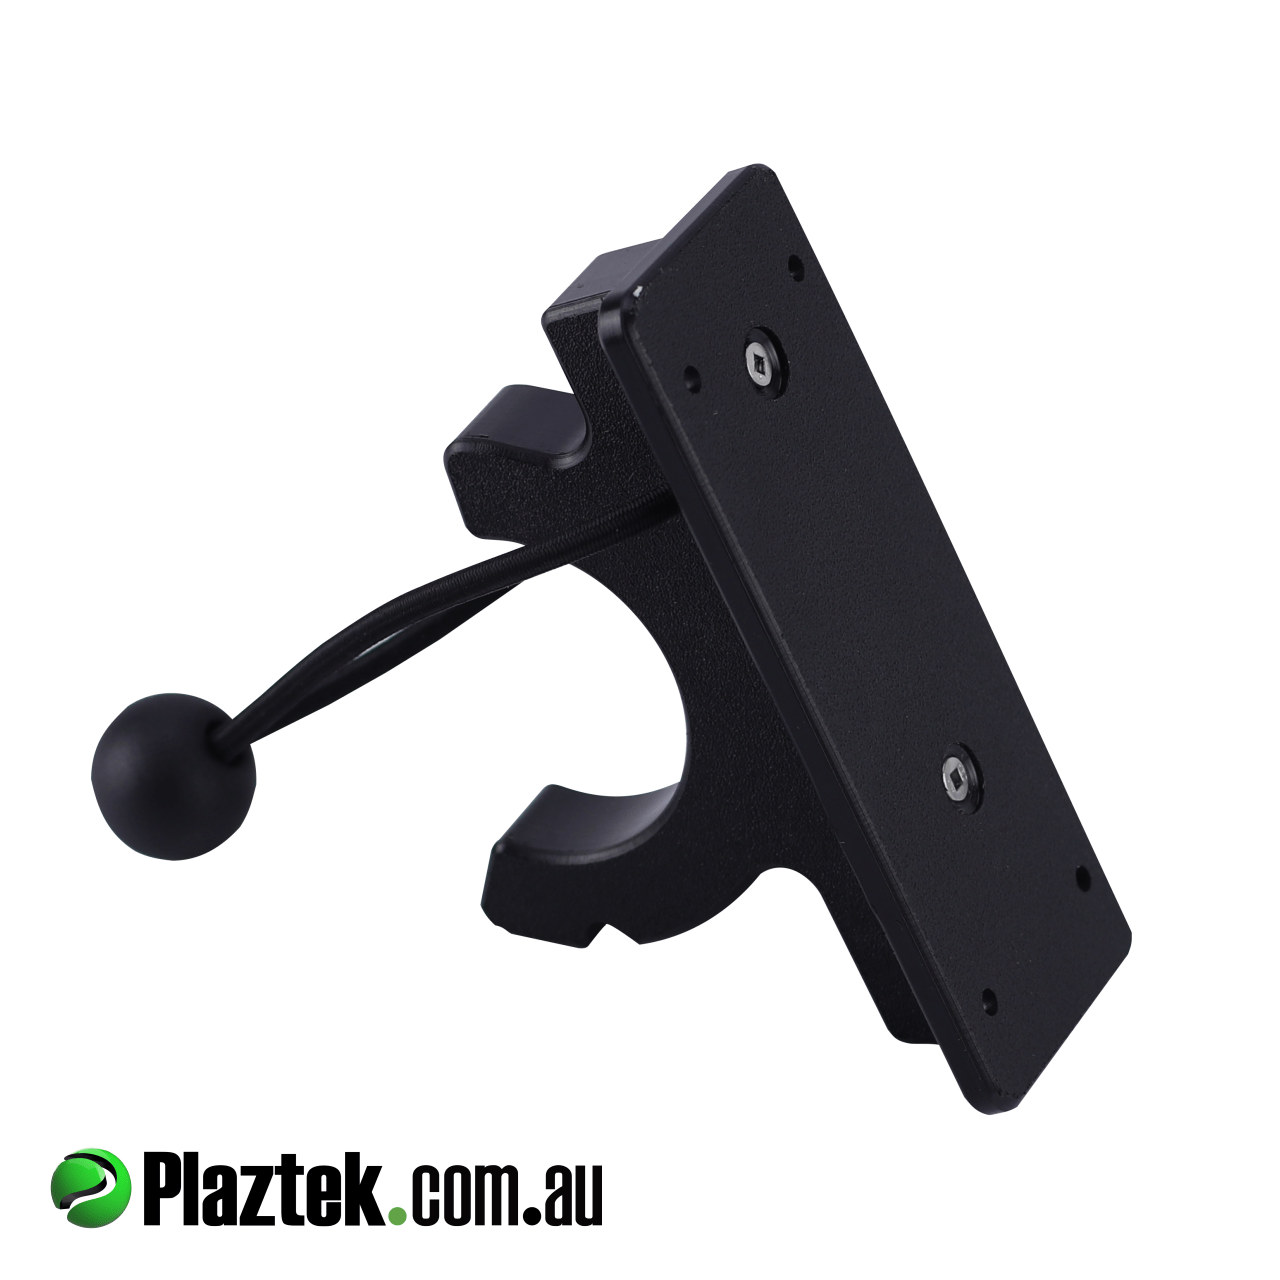 Plaztek Yabby Pump holder in Black King Starboard with backing plate for a screwed fixing